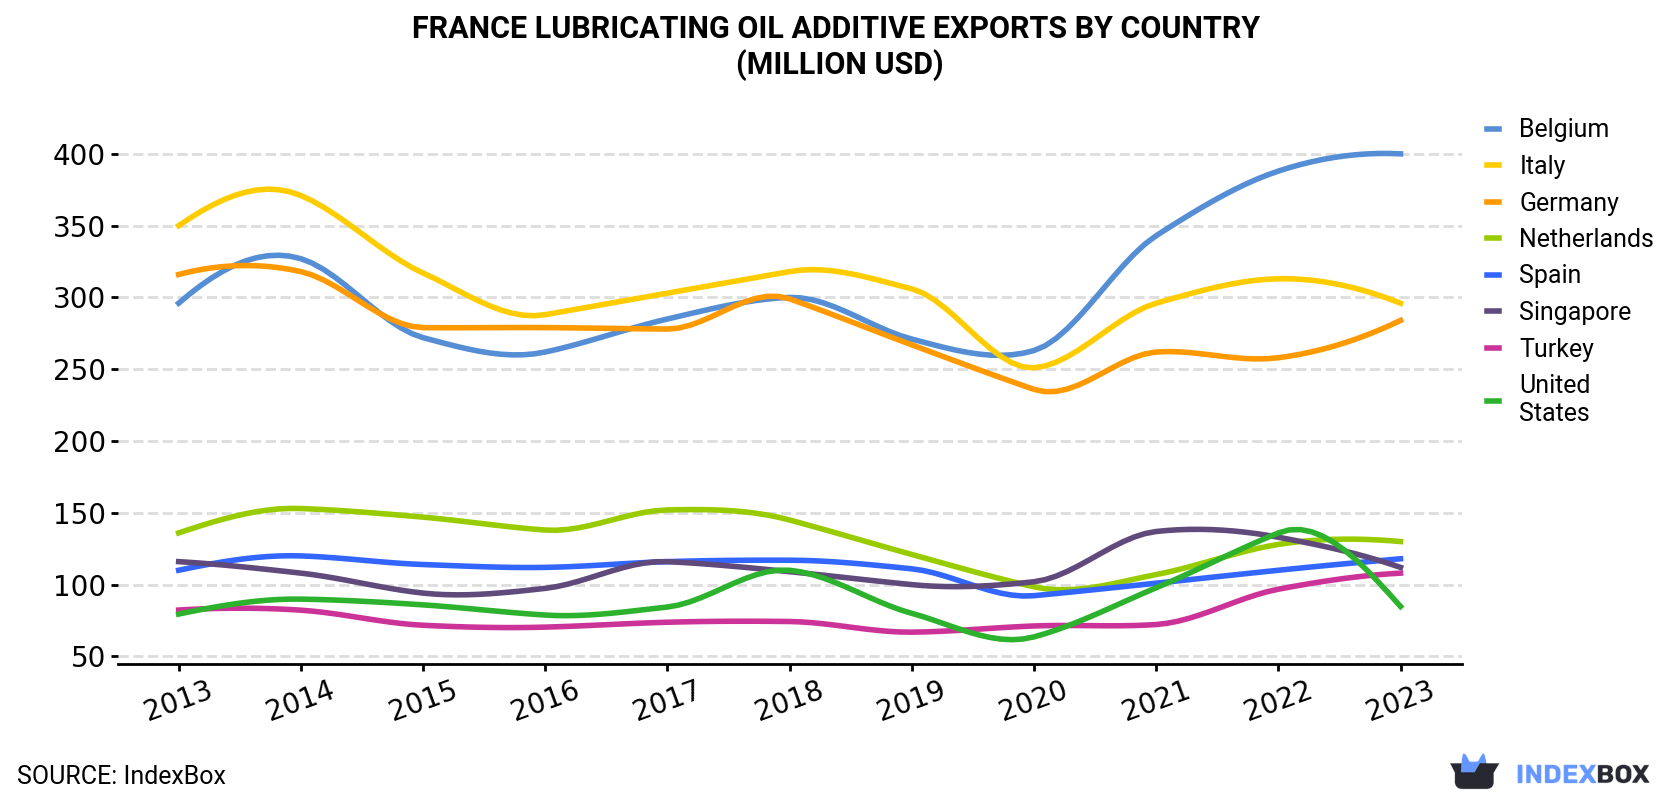 France Lubricating Oil Additive Exports By Country (Million USD)